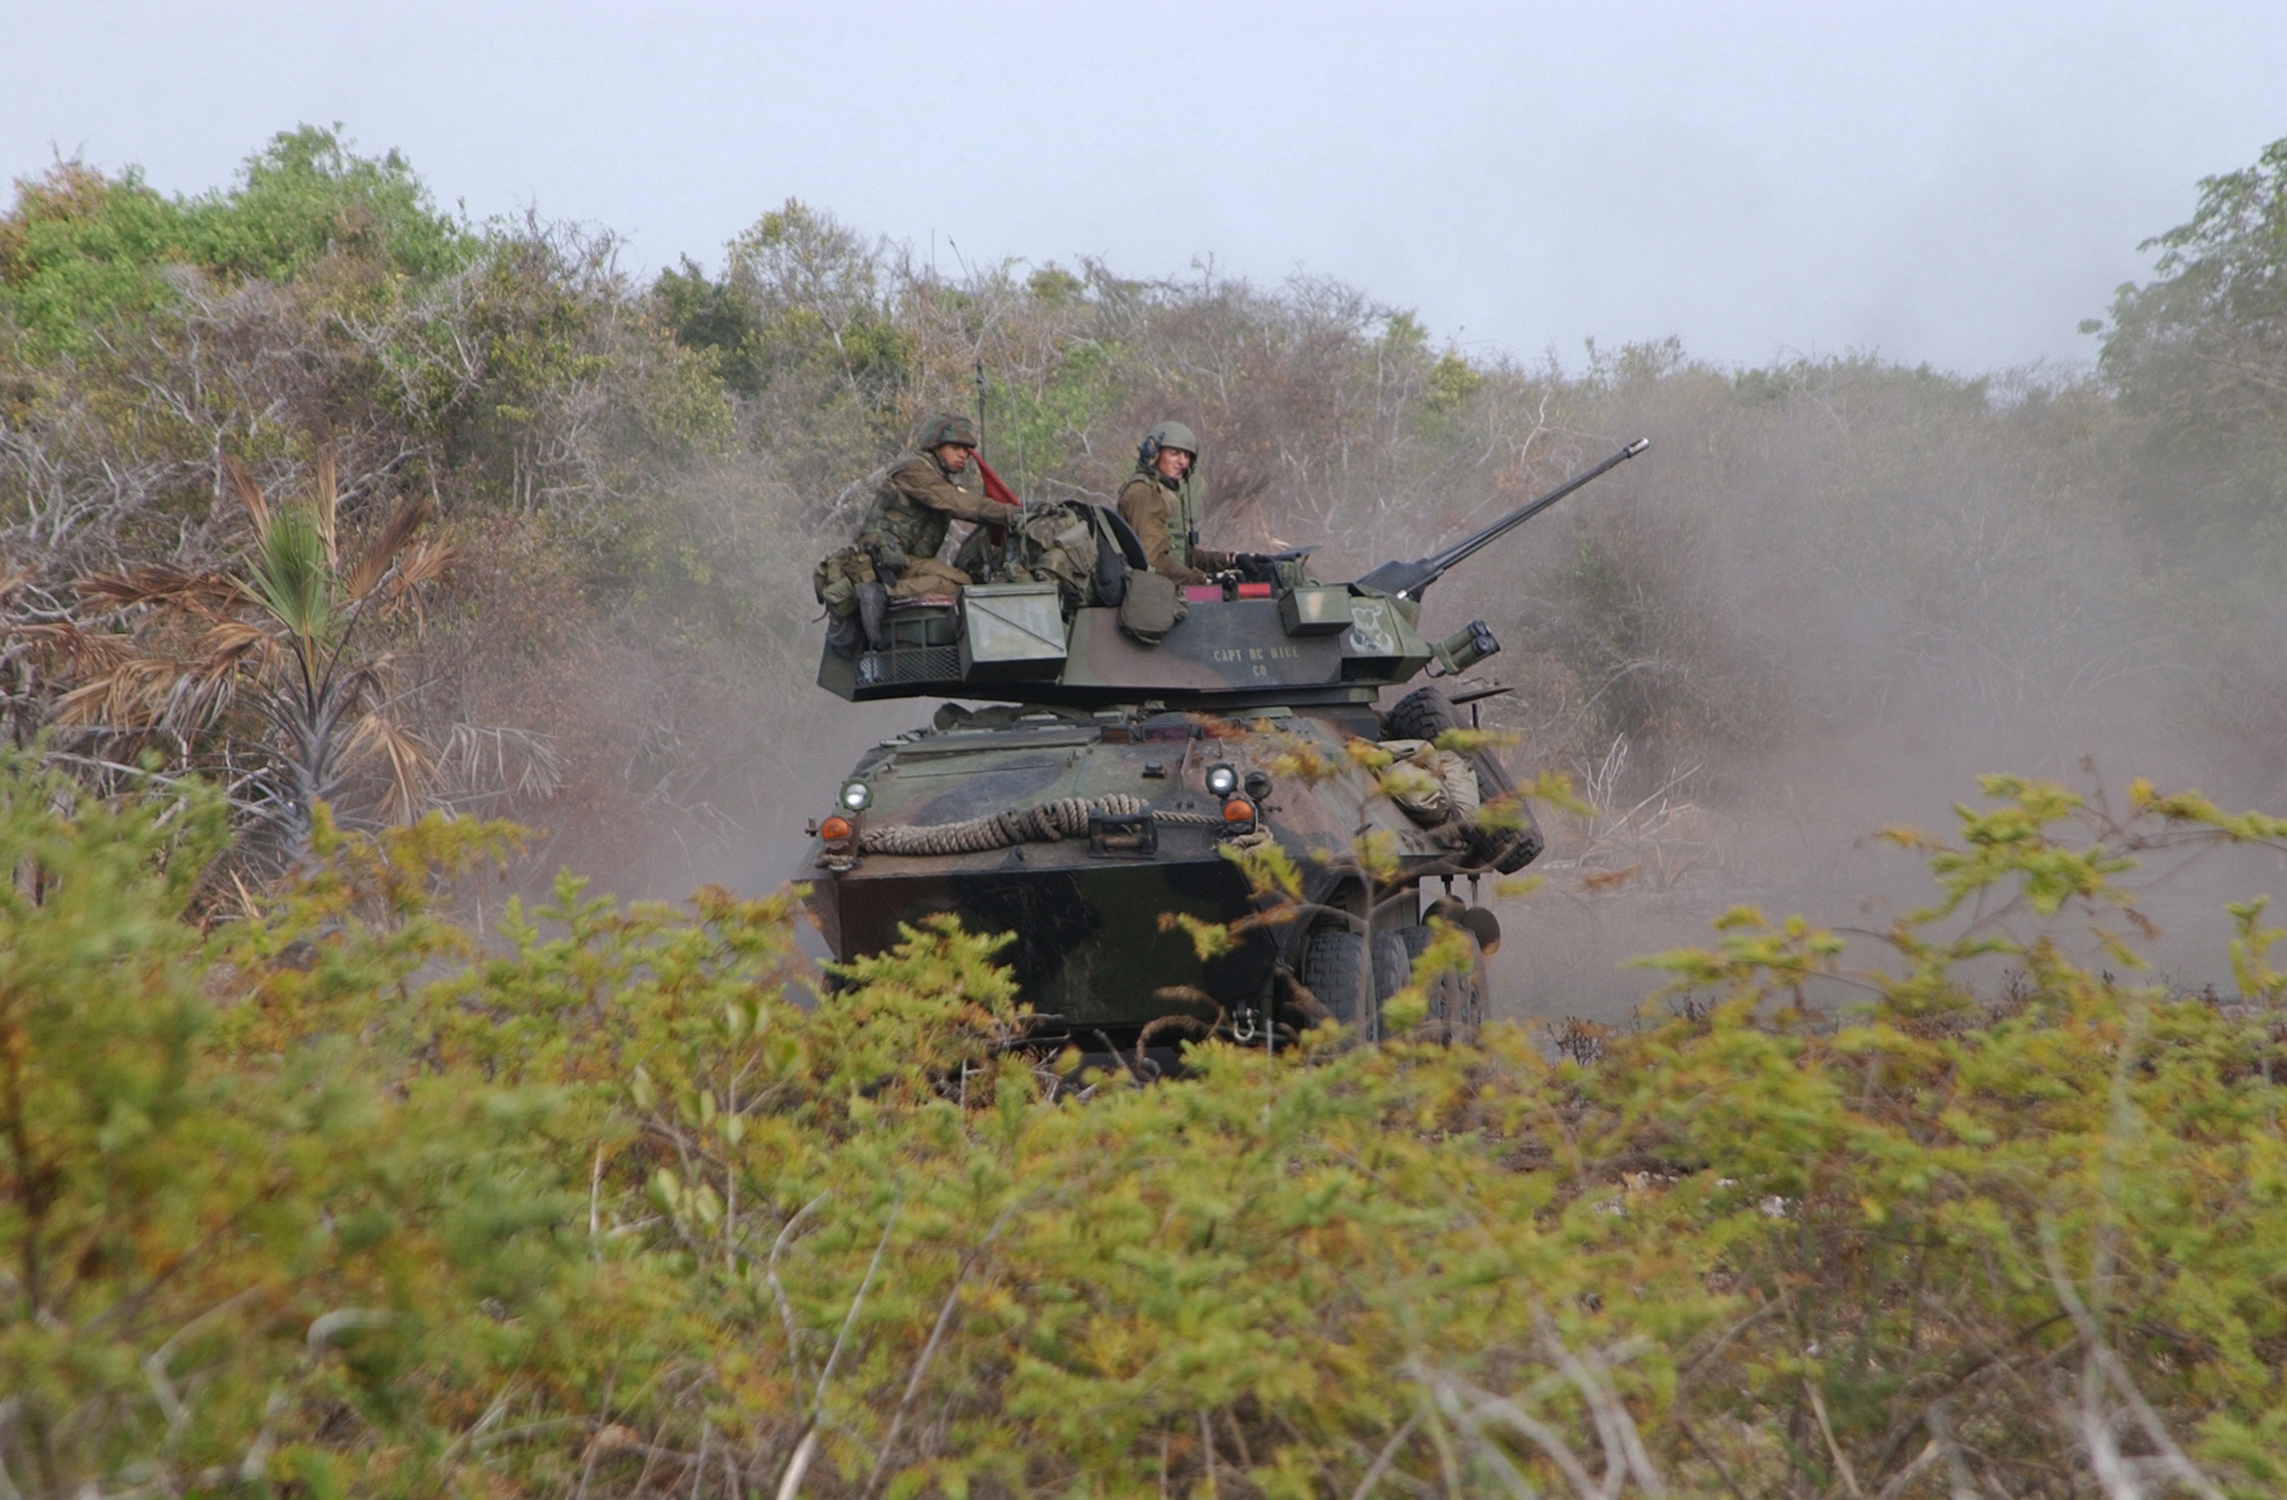 A Light Armored Vehicle from, Charlie Company, 1st Light Armored Reconnaissance Battalion, 13th Marine Expeditionary Unit (Special Operations Capable) moves down range during a live fire exercise during Exercise Edged Mallet, Manda Bay Naval Base, Lamu, Kenya, February 9, 2002.  Official USMC Photo (Released) Photo by: LCpl Daniel Kelly 